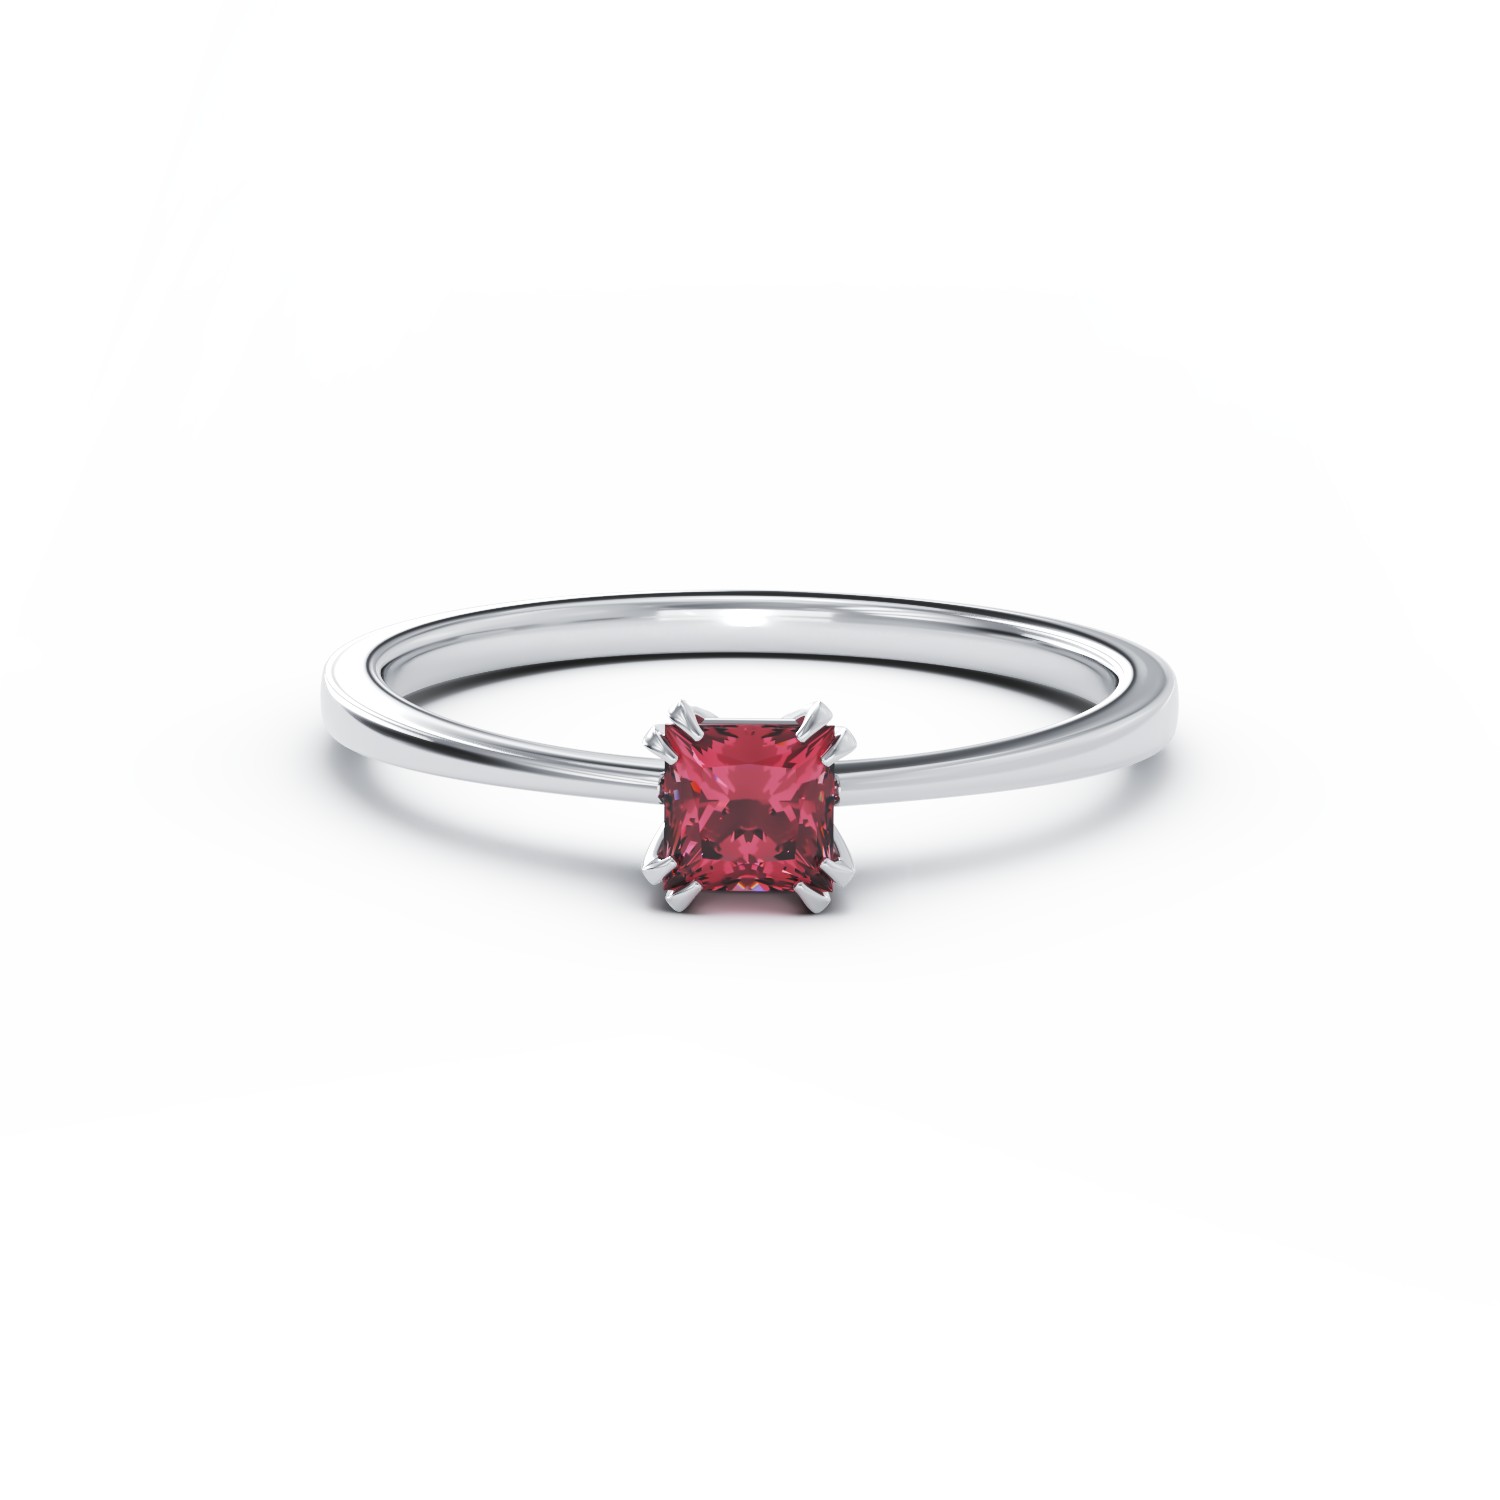 18K white gold engagement ring with 0.4ct tourmaline